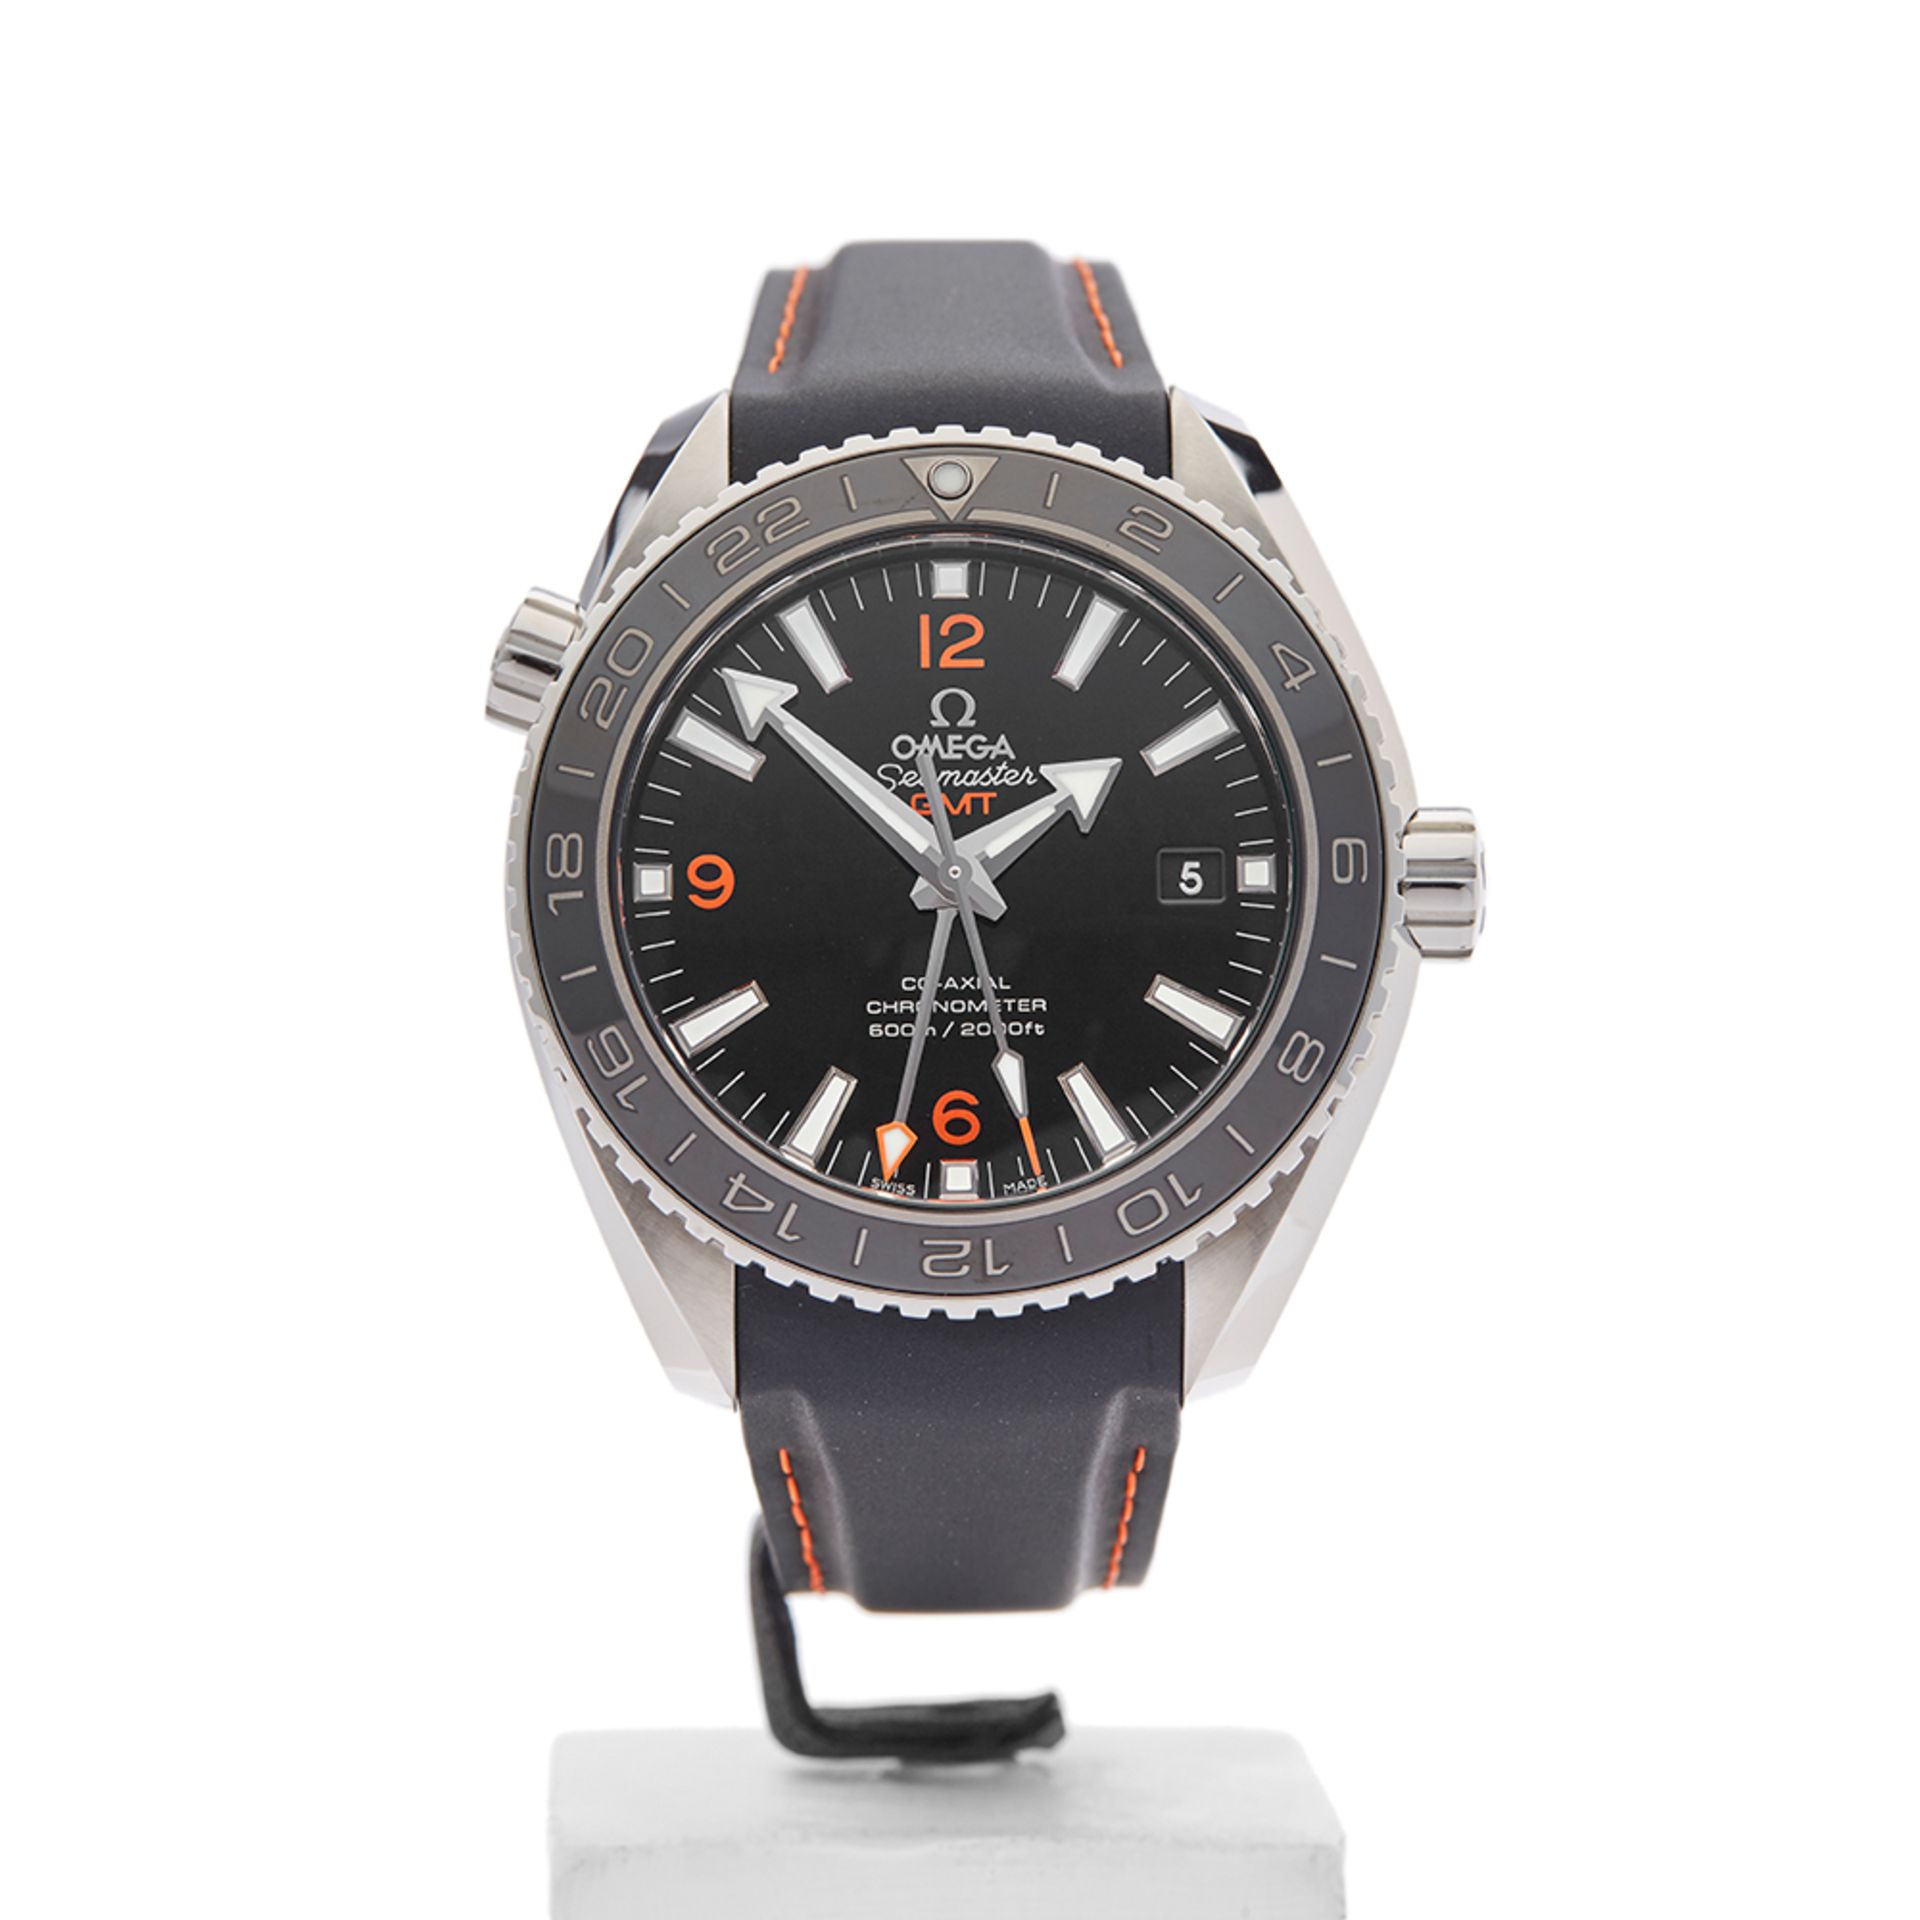 Omega Seamaster Planet Ocean GMT 43mm Stainless Steel - 232.32.44.22.01.002 - Image 2 of 9